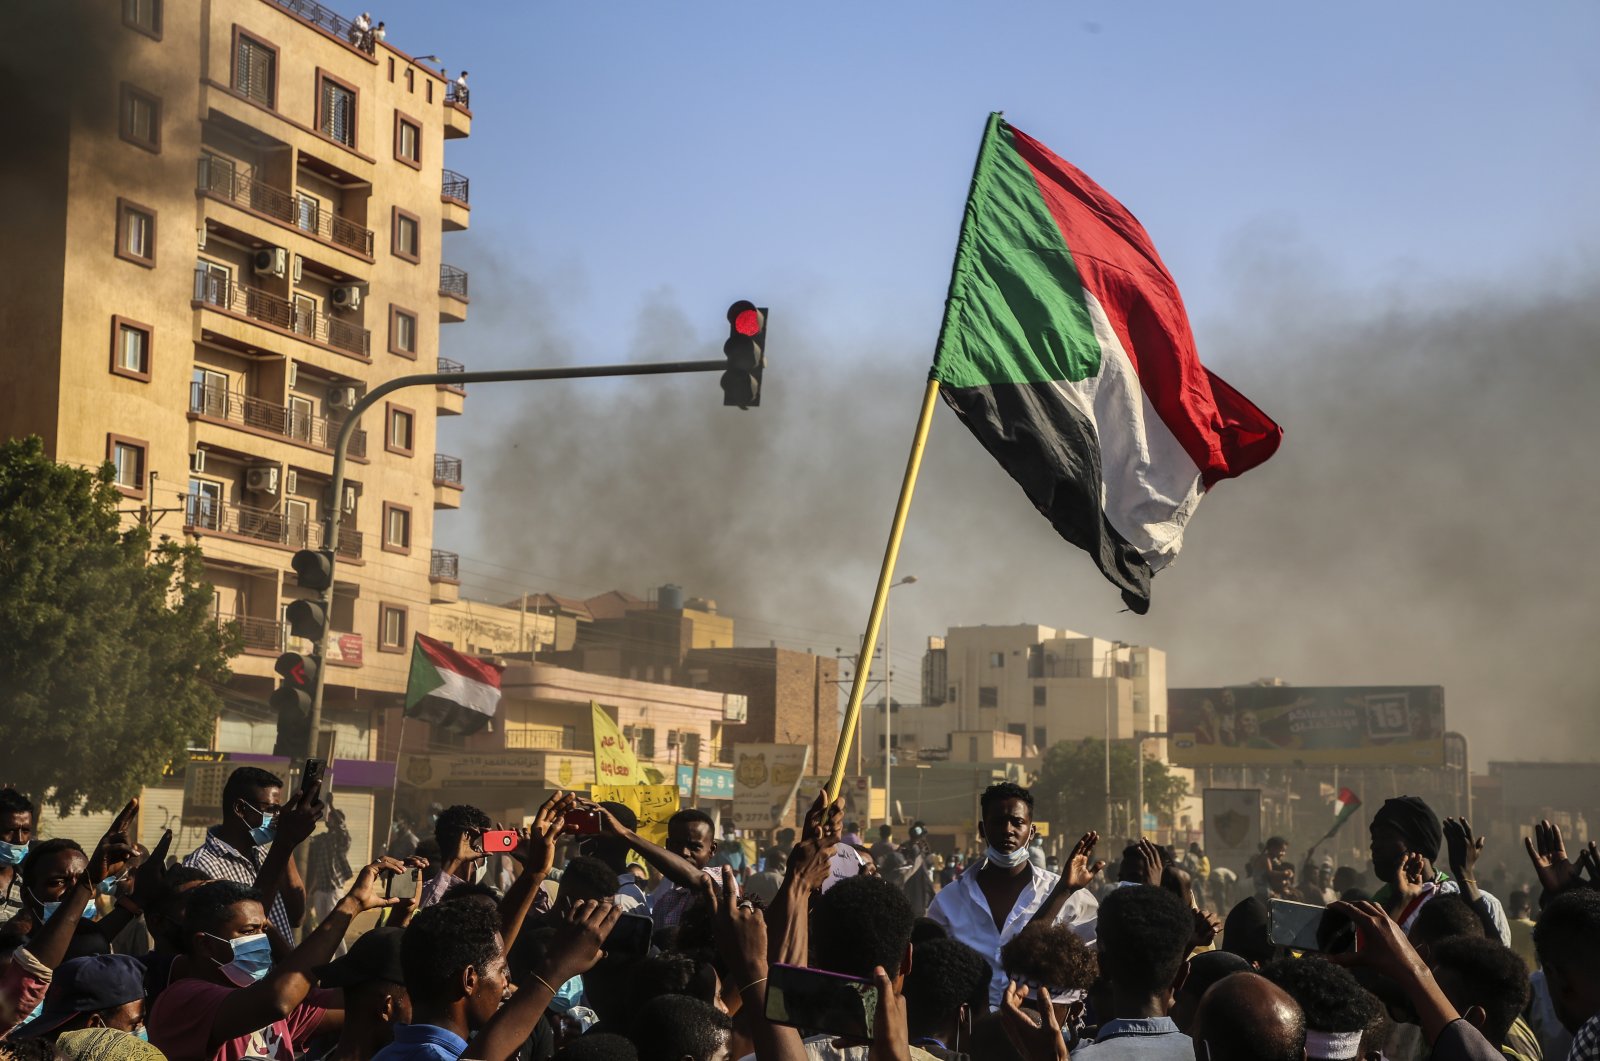 Sudanese people march during a protest against the military coup in Khartoum, Sudan, Nov. 13, 2021. (EPA Photo)